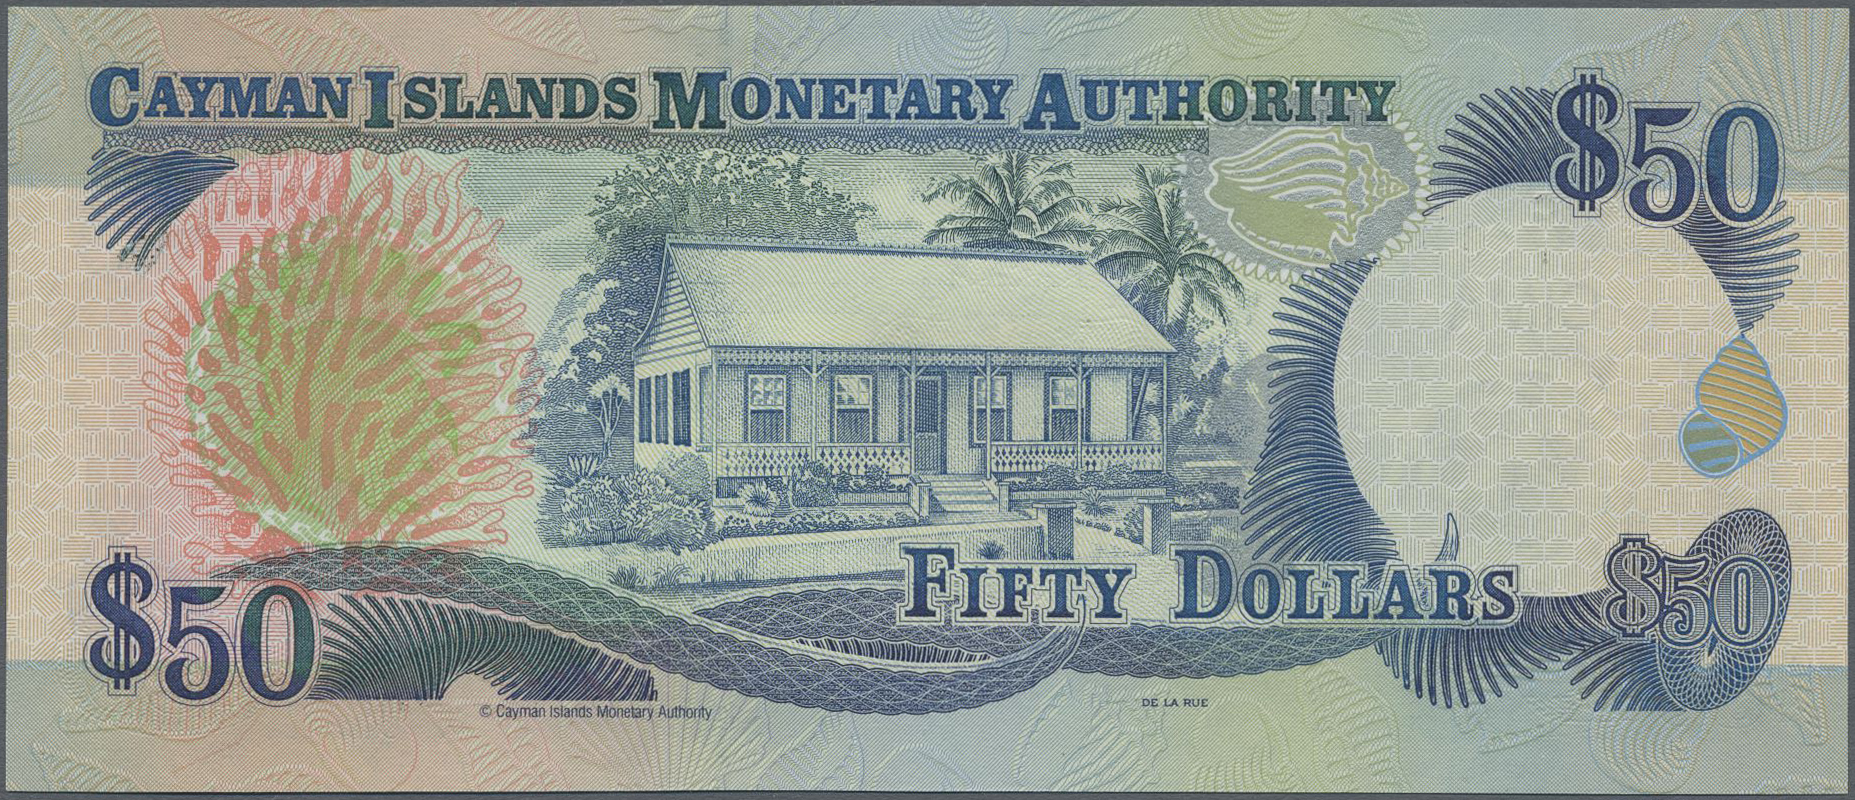 Lot 00137 - Cayman Islands | Banknoten  -  Auktionshaus Christoph Gärtner GmbH & Co. KG 55th AUCTION - Day 1